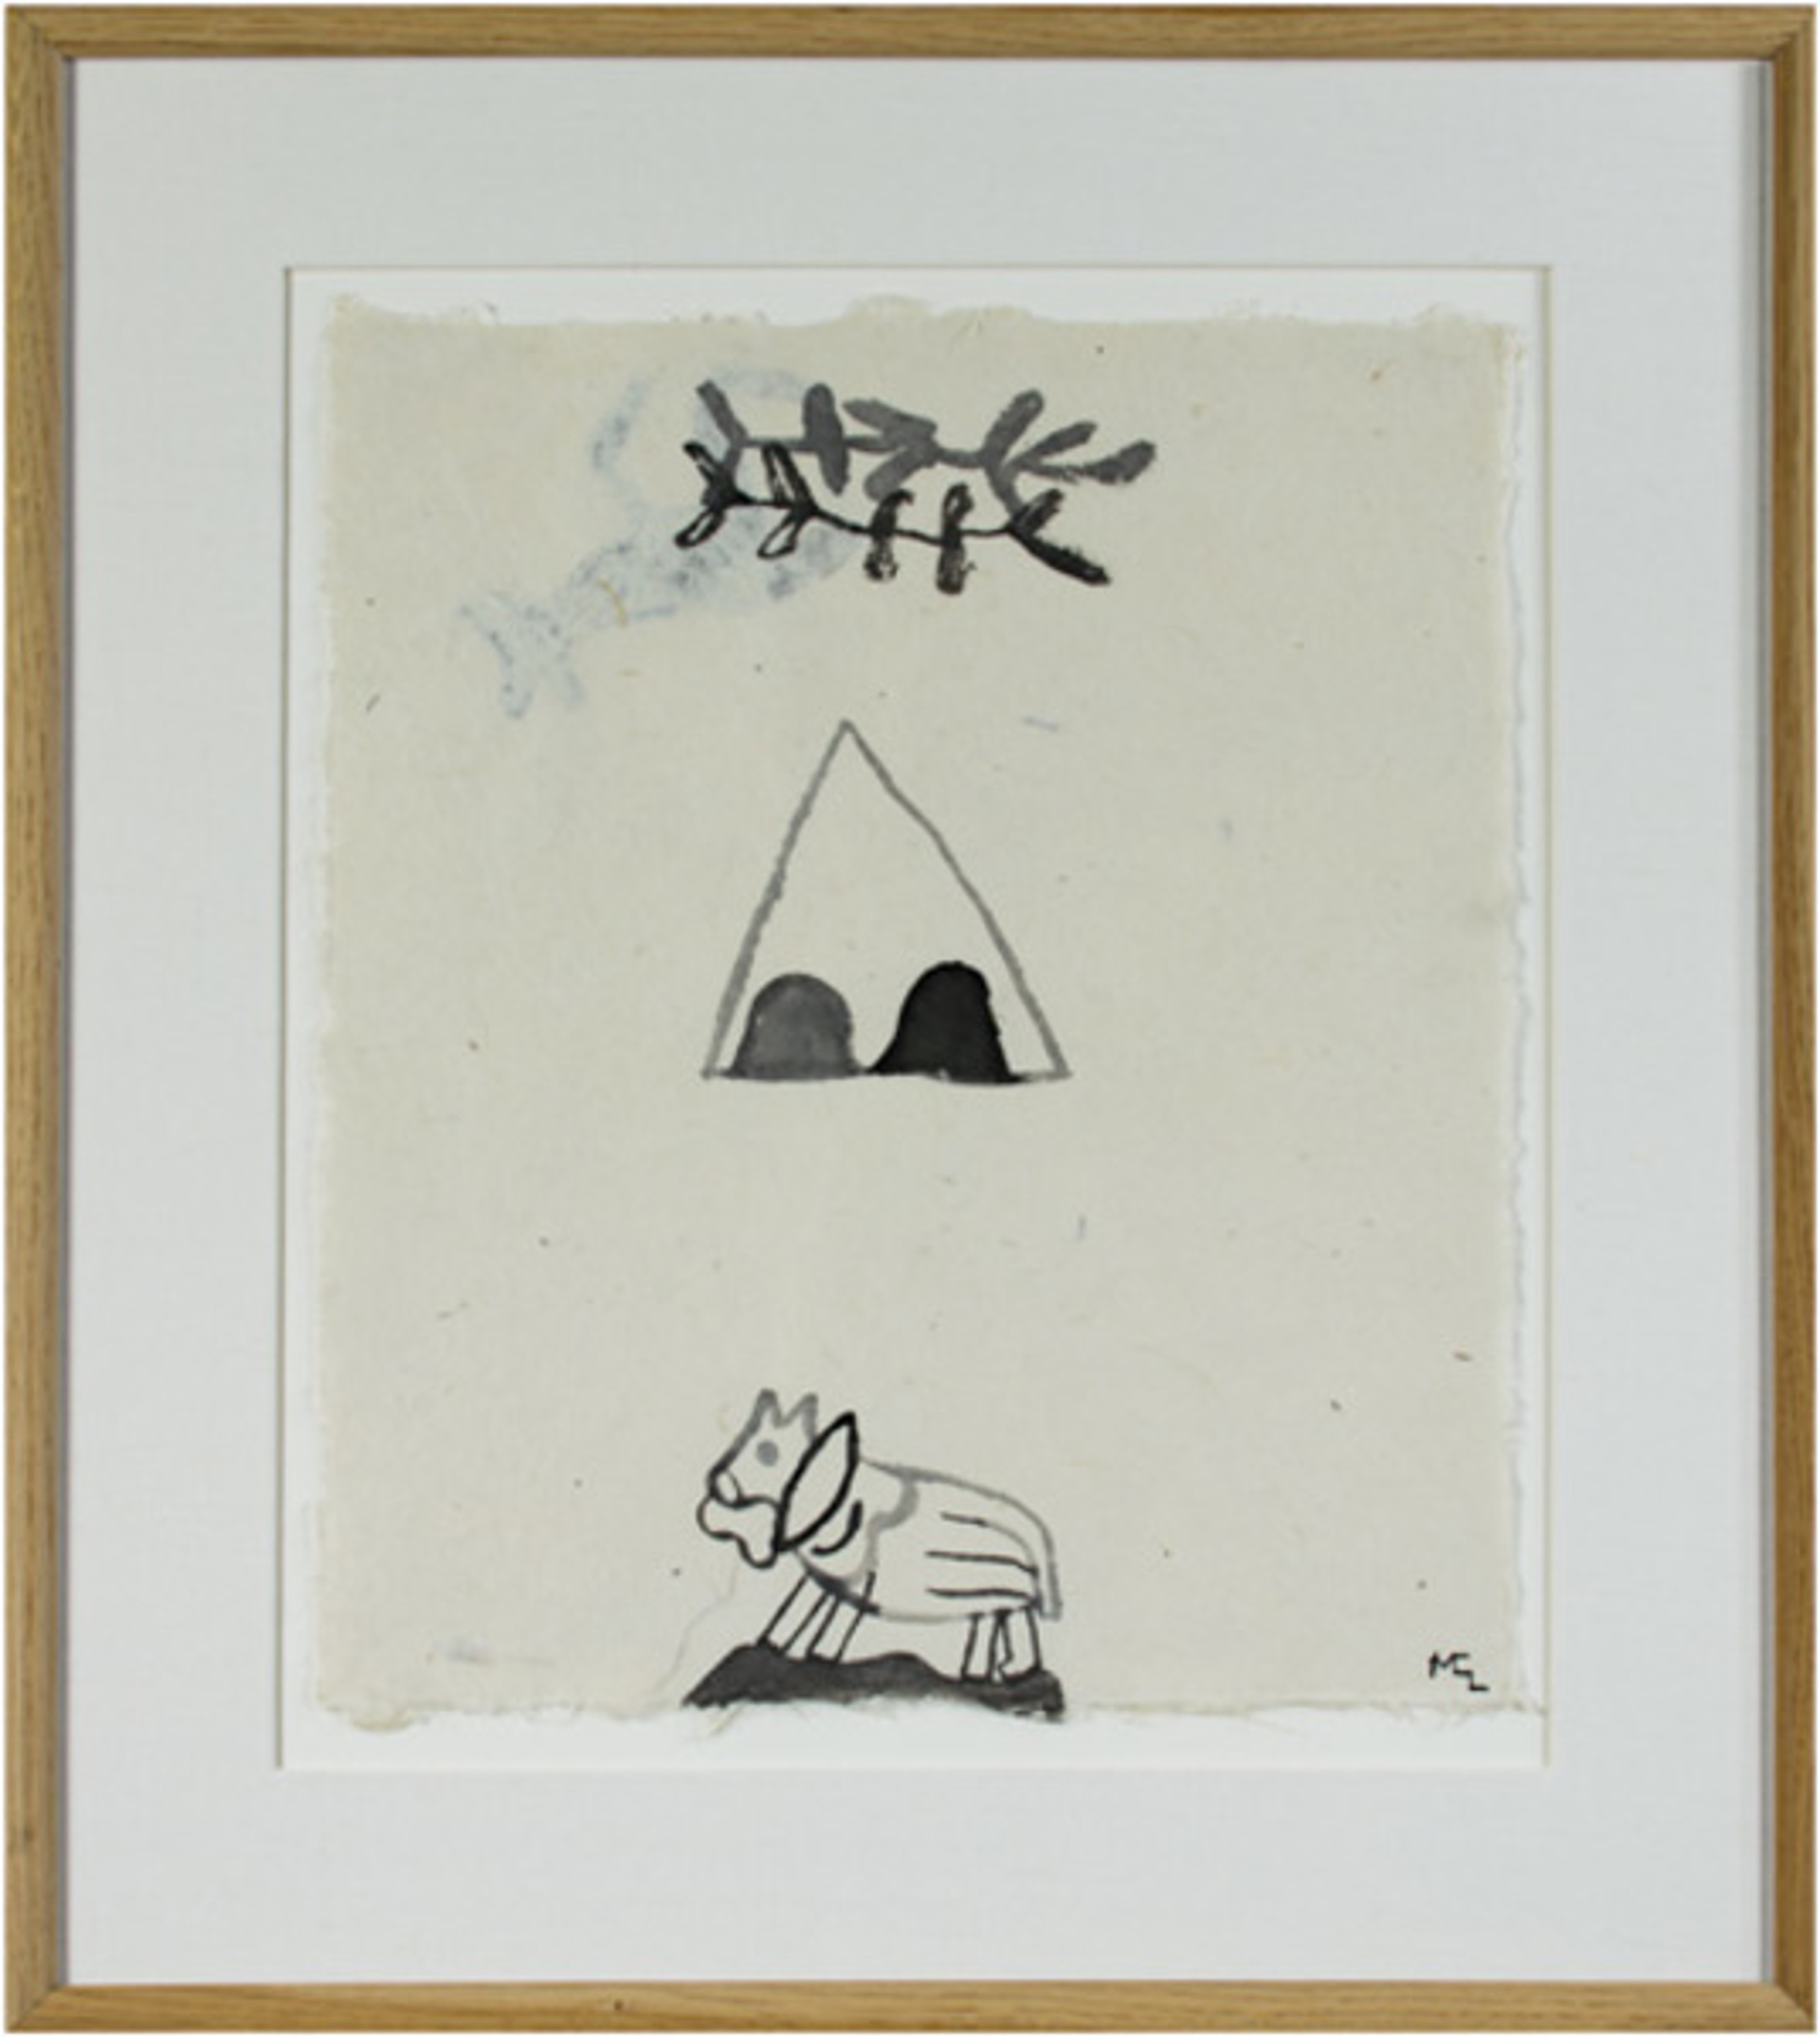 Horse in Desert w/Teepee & Branches (2nd Image on Reverse) by Miguel-Castro Leñero